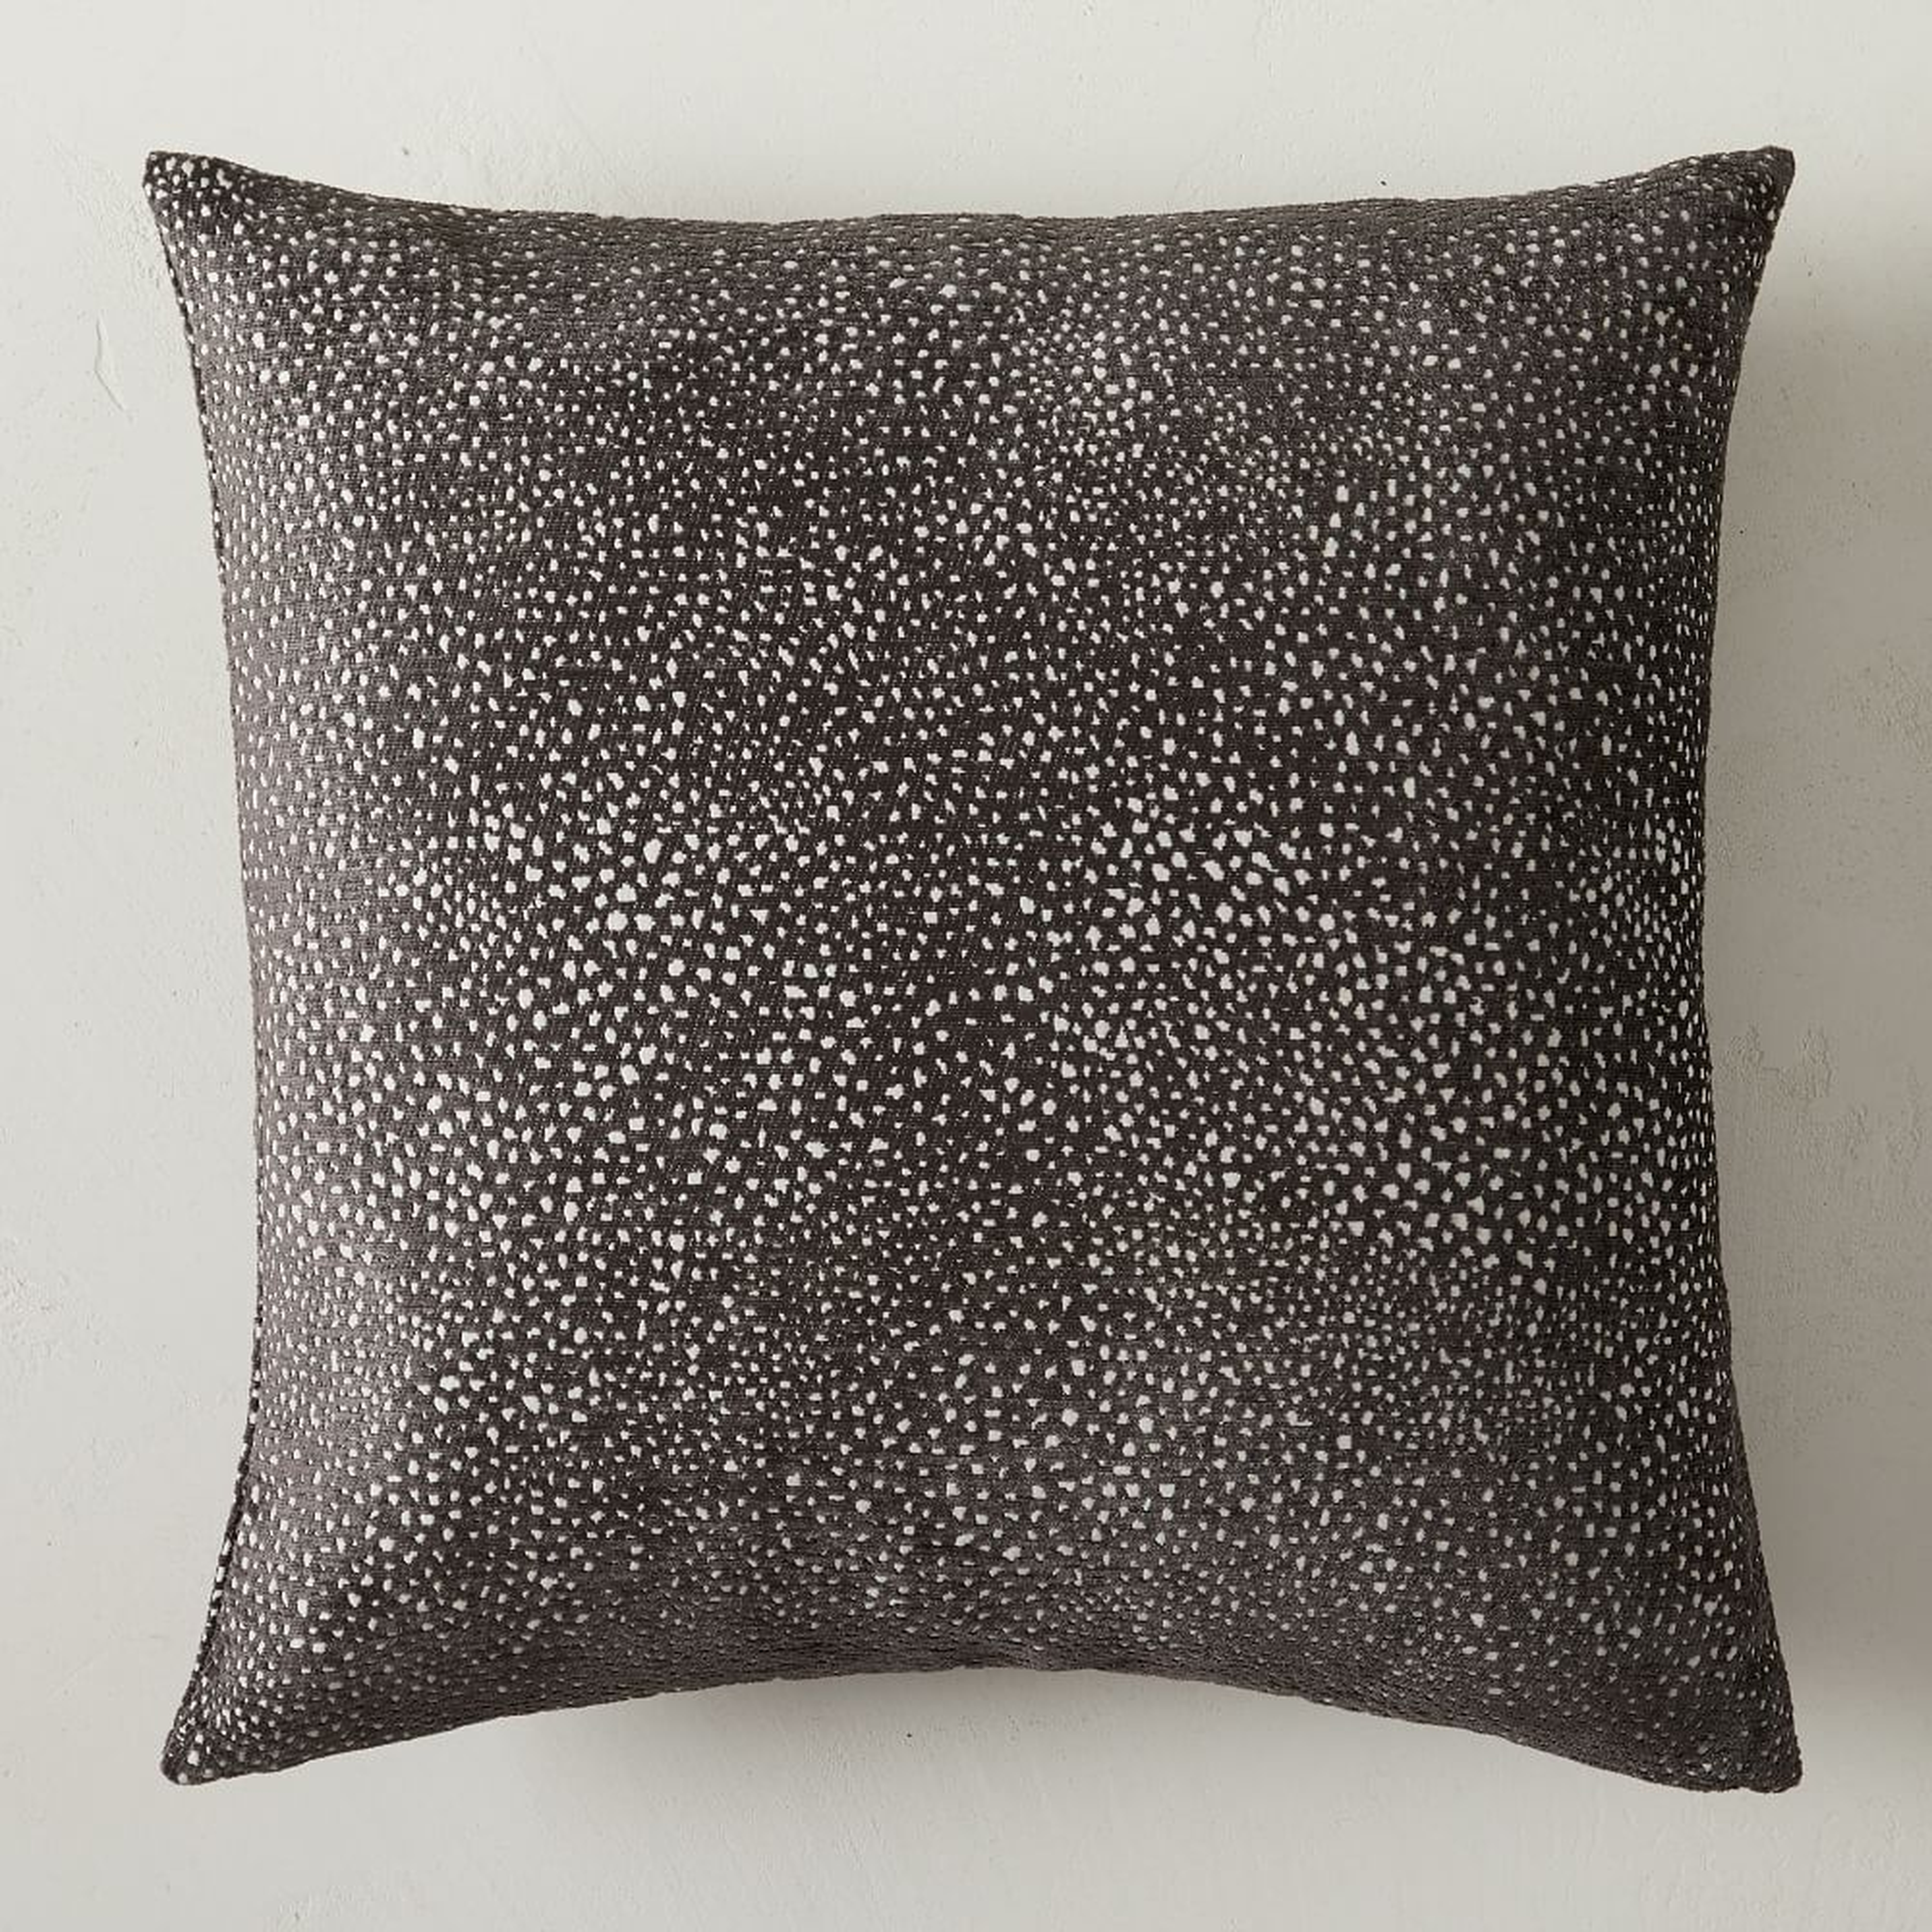 Dotted Chenille Jacquard Pillow Cover, Slate, 20x20, Set of 2 - West Elm